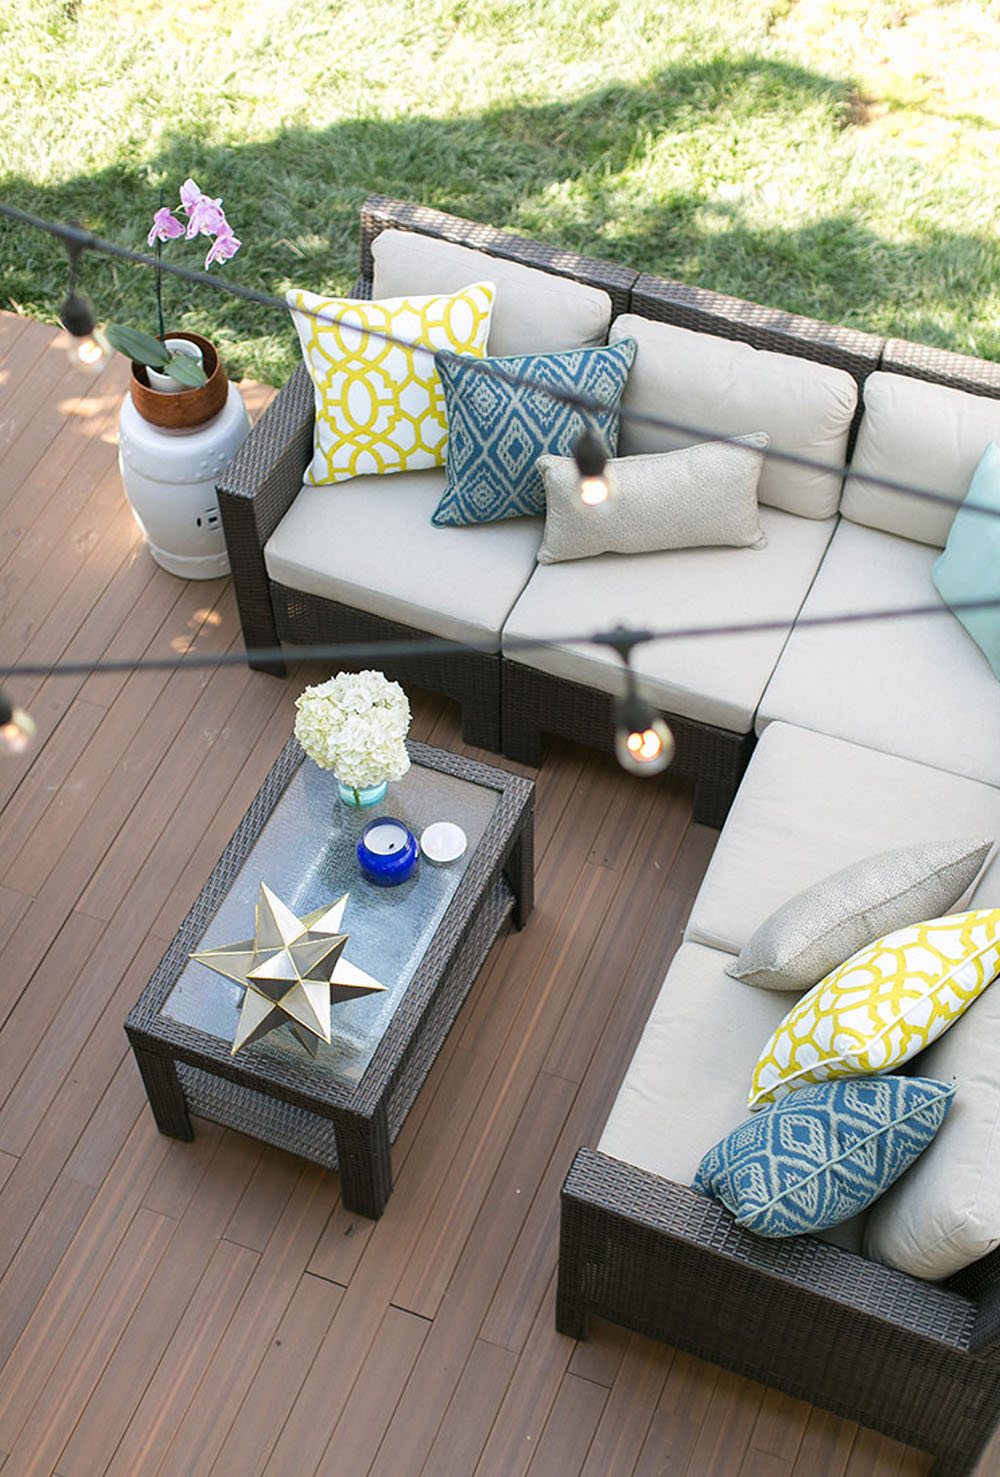 A deck floor decorated with an outdoor sectional, coffee table, pillows, and string lights.